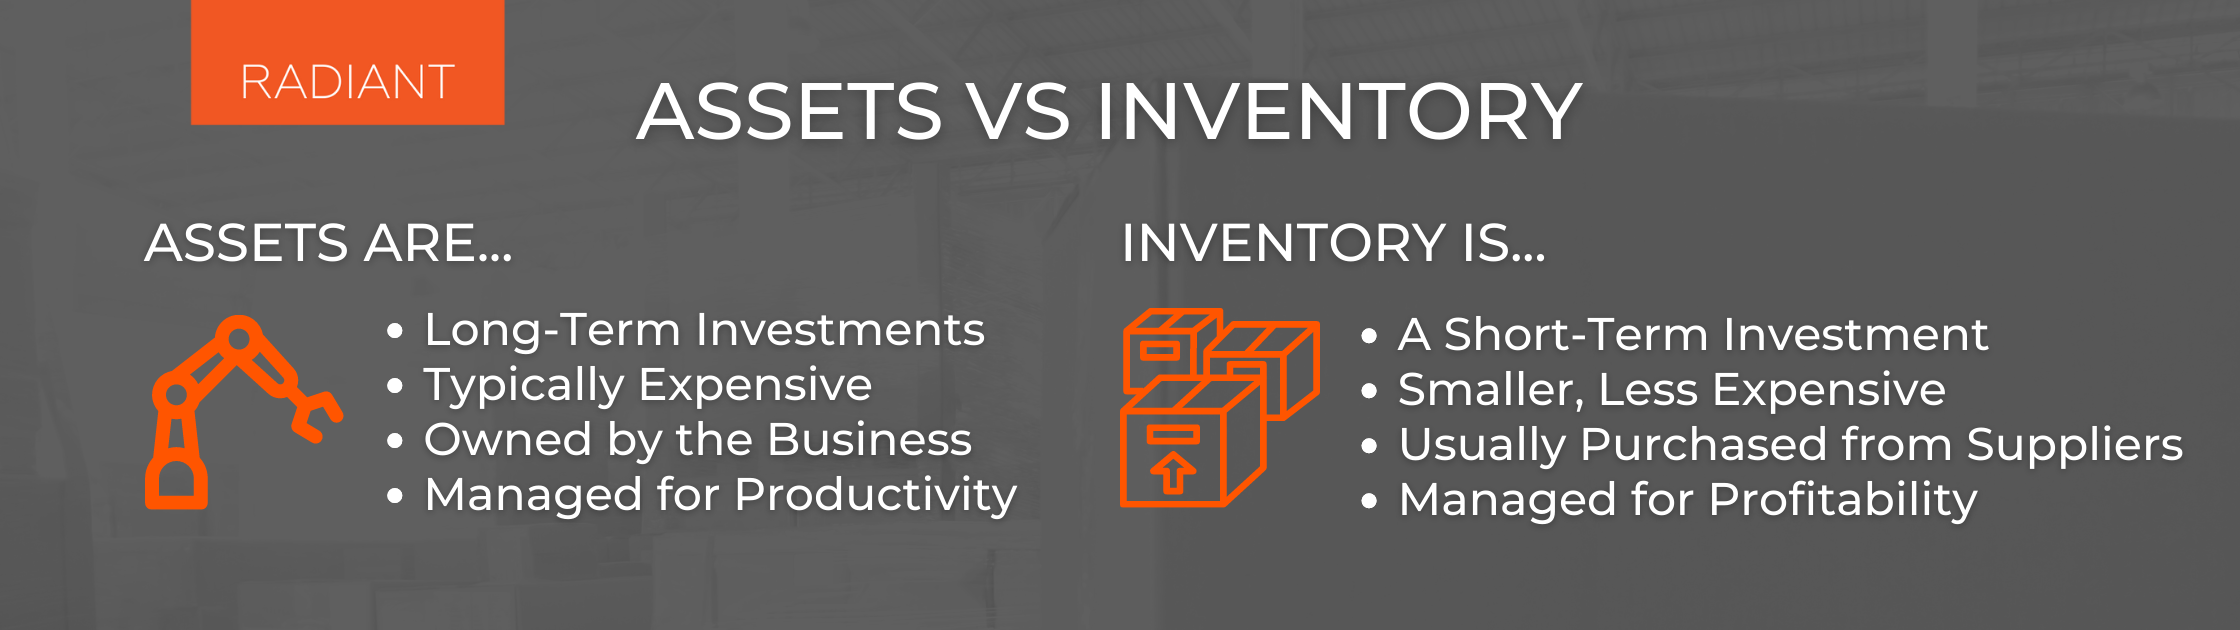 Fixed Asset and Inventory Management System - Asset Management vs Inventory Management - Assets and Inventory - Assets vs Inventory - Fixed Asset and Inventory Management - Fixed Assets and Inventory Management - Fixed Asset and Inventory Management Software